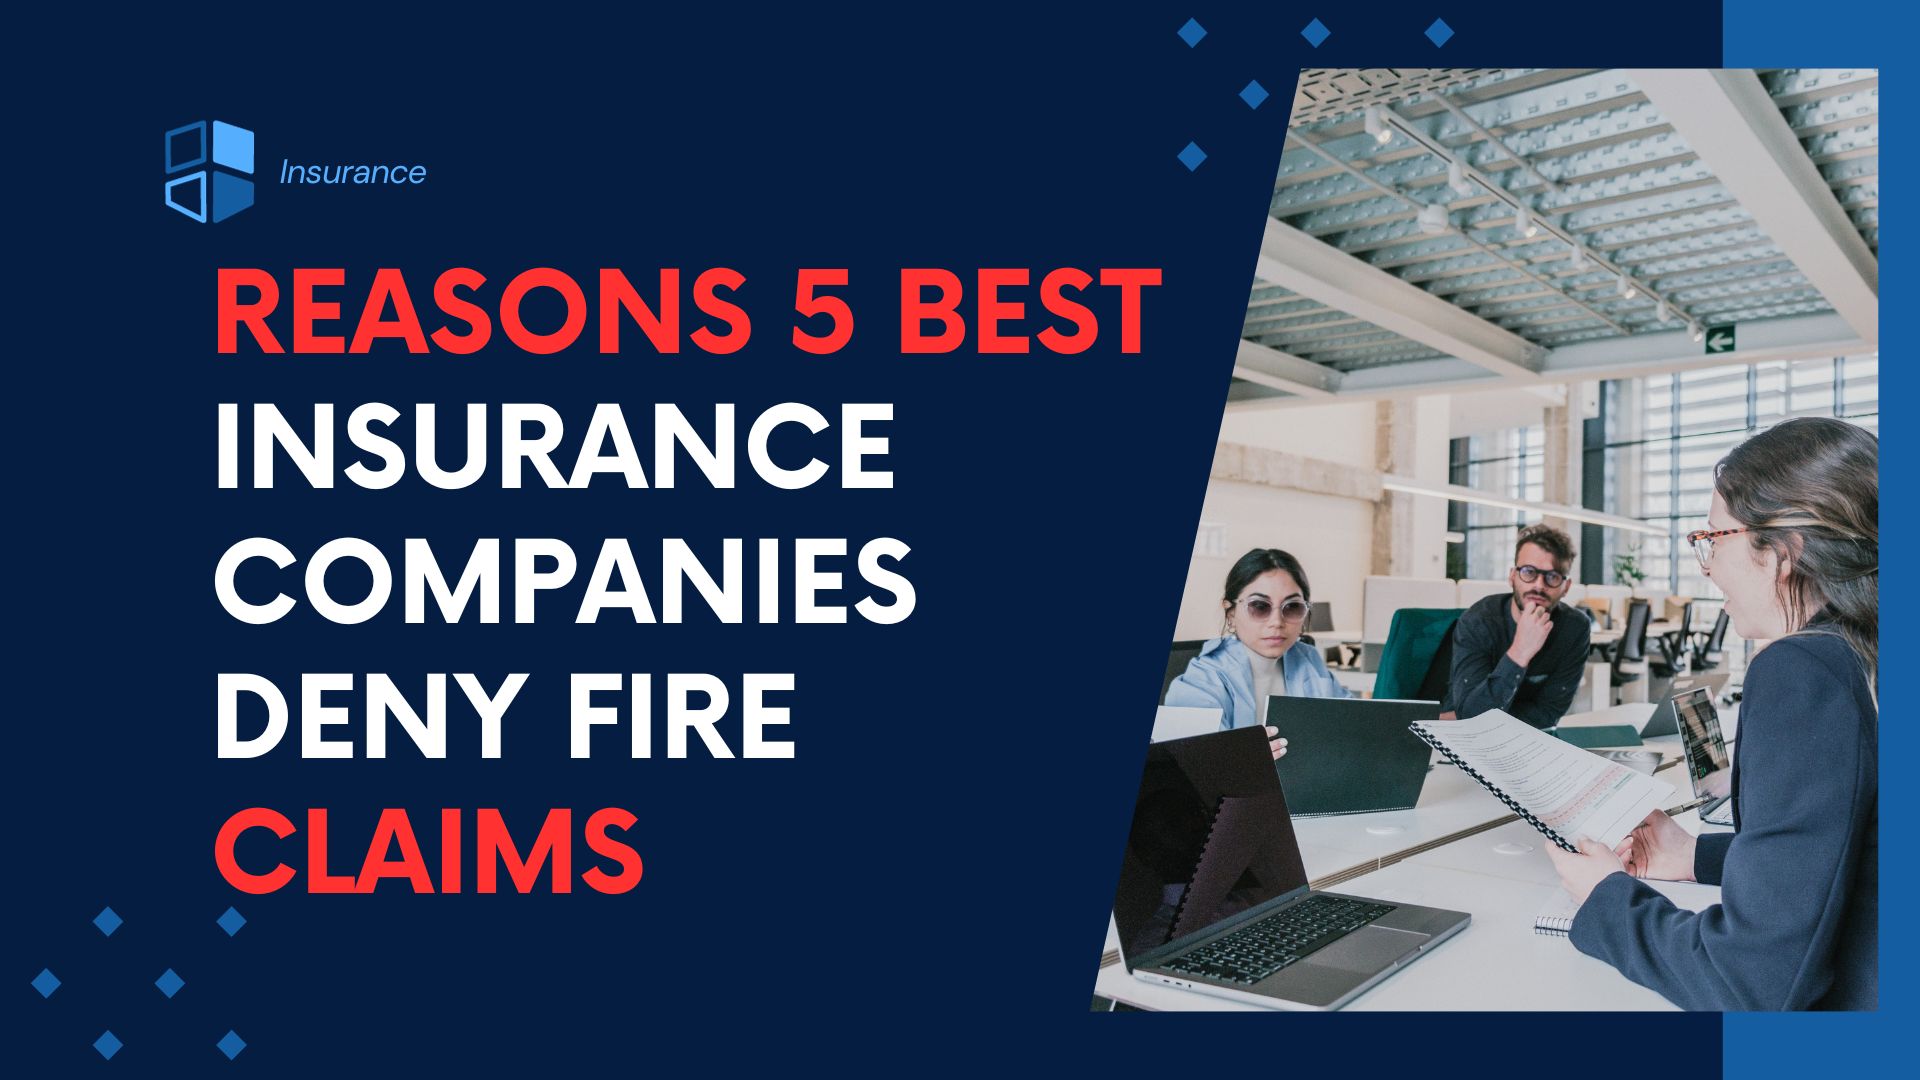 You are currently viewing Reasons 5 Best insurance companies deny fire claims,